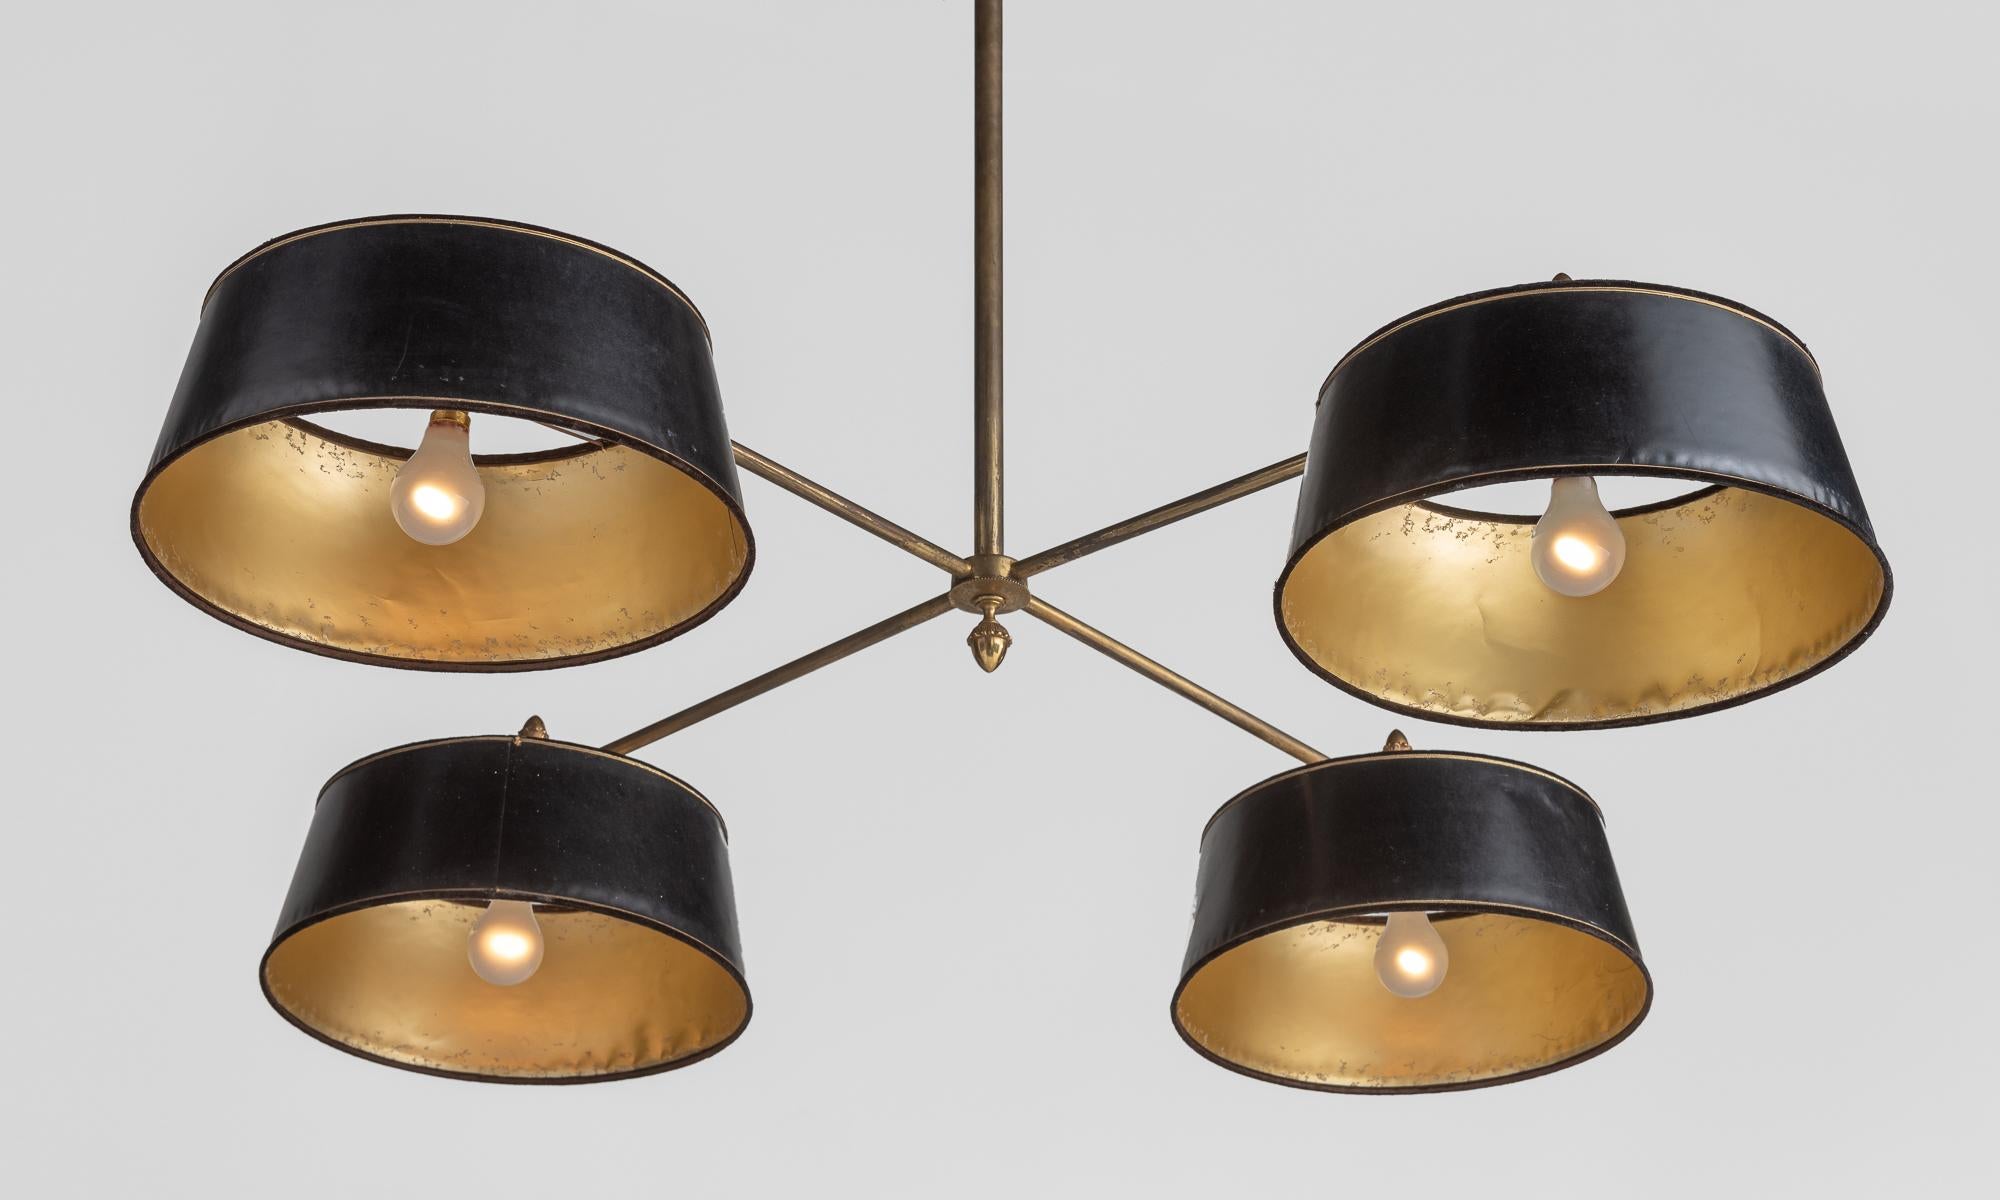 Brass and leather Billiard lights, France, circa 1950.

Includes original leather shades with gilded interiors and brass detailing.